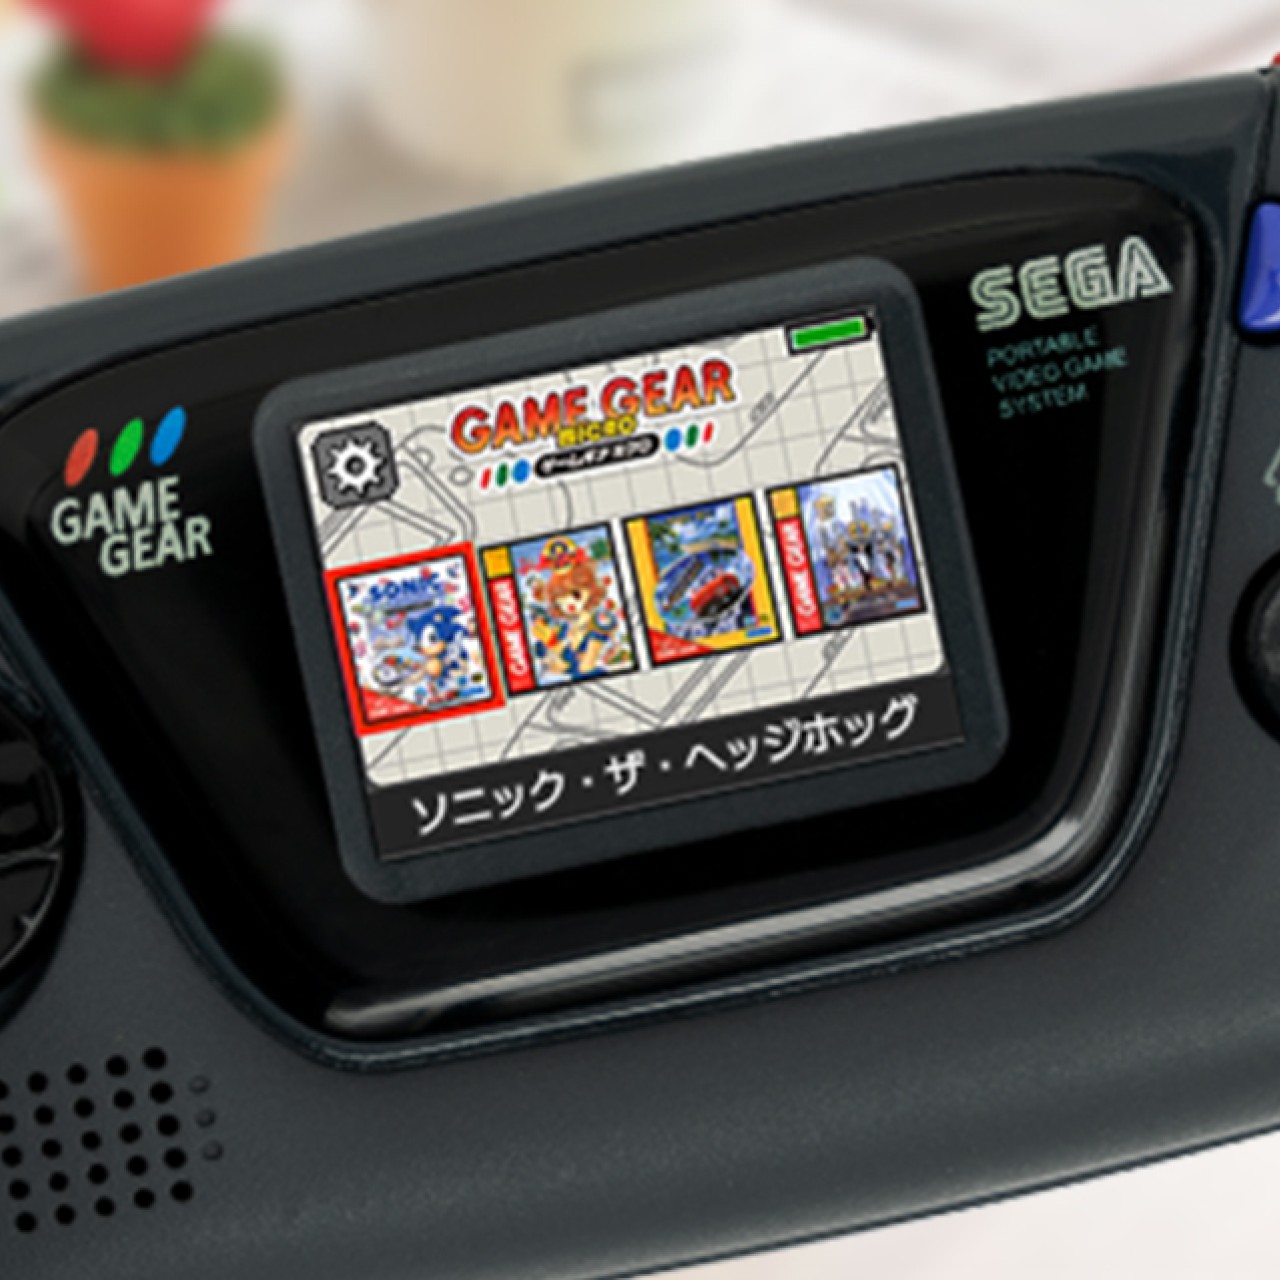 Sega's Game Gear turns 30: Amazing portable consolefor its time - YP